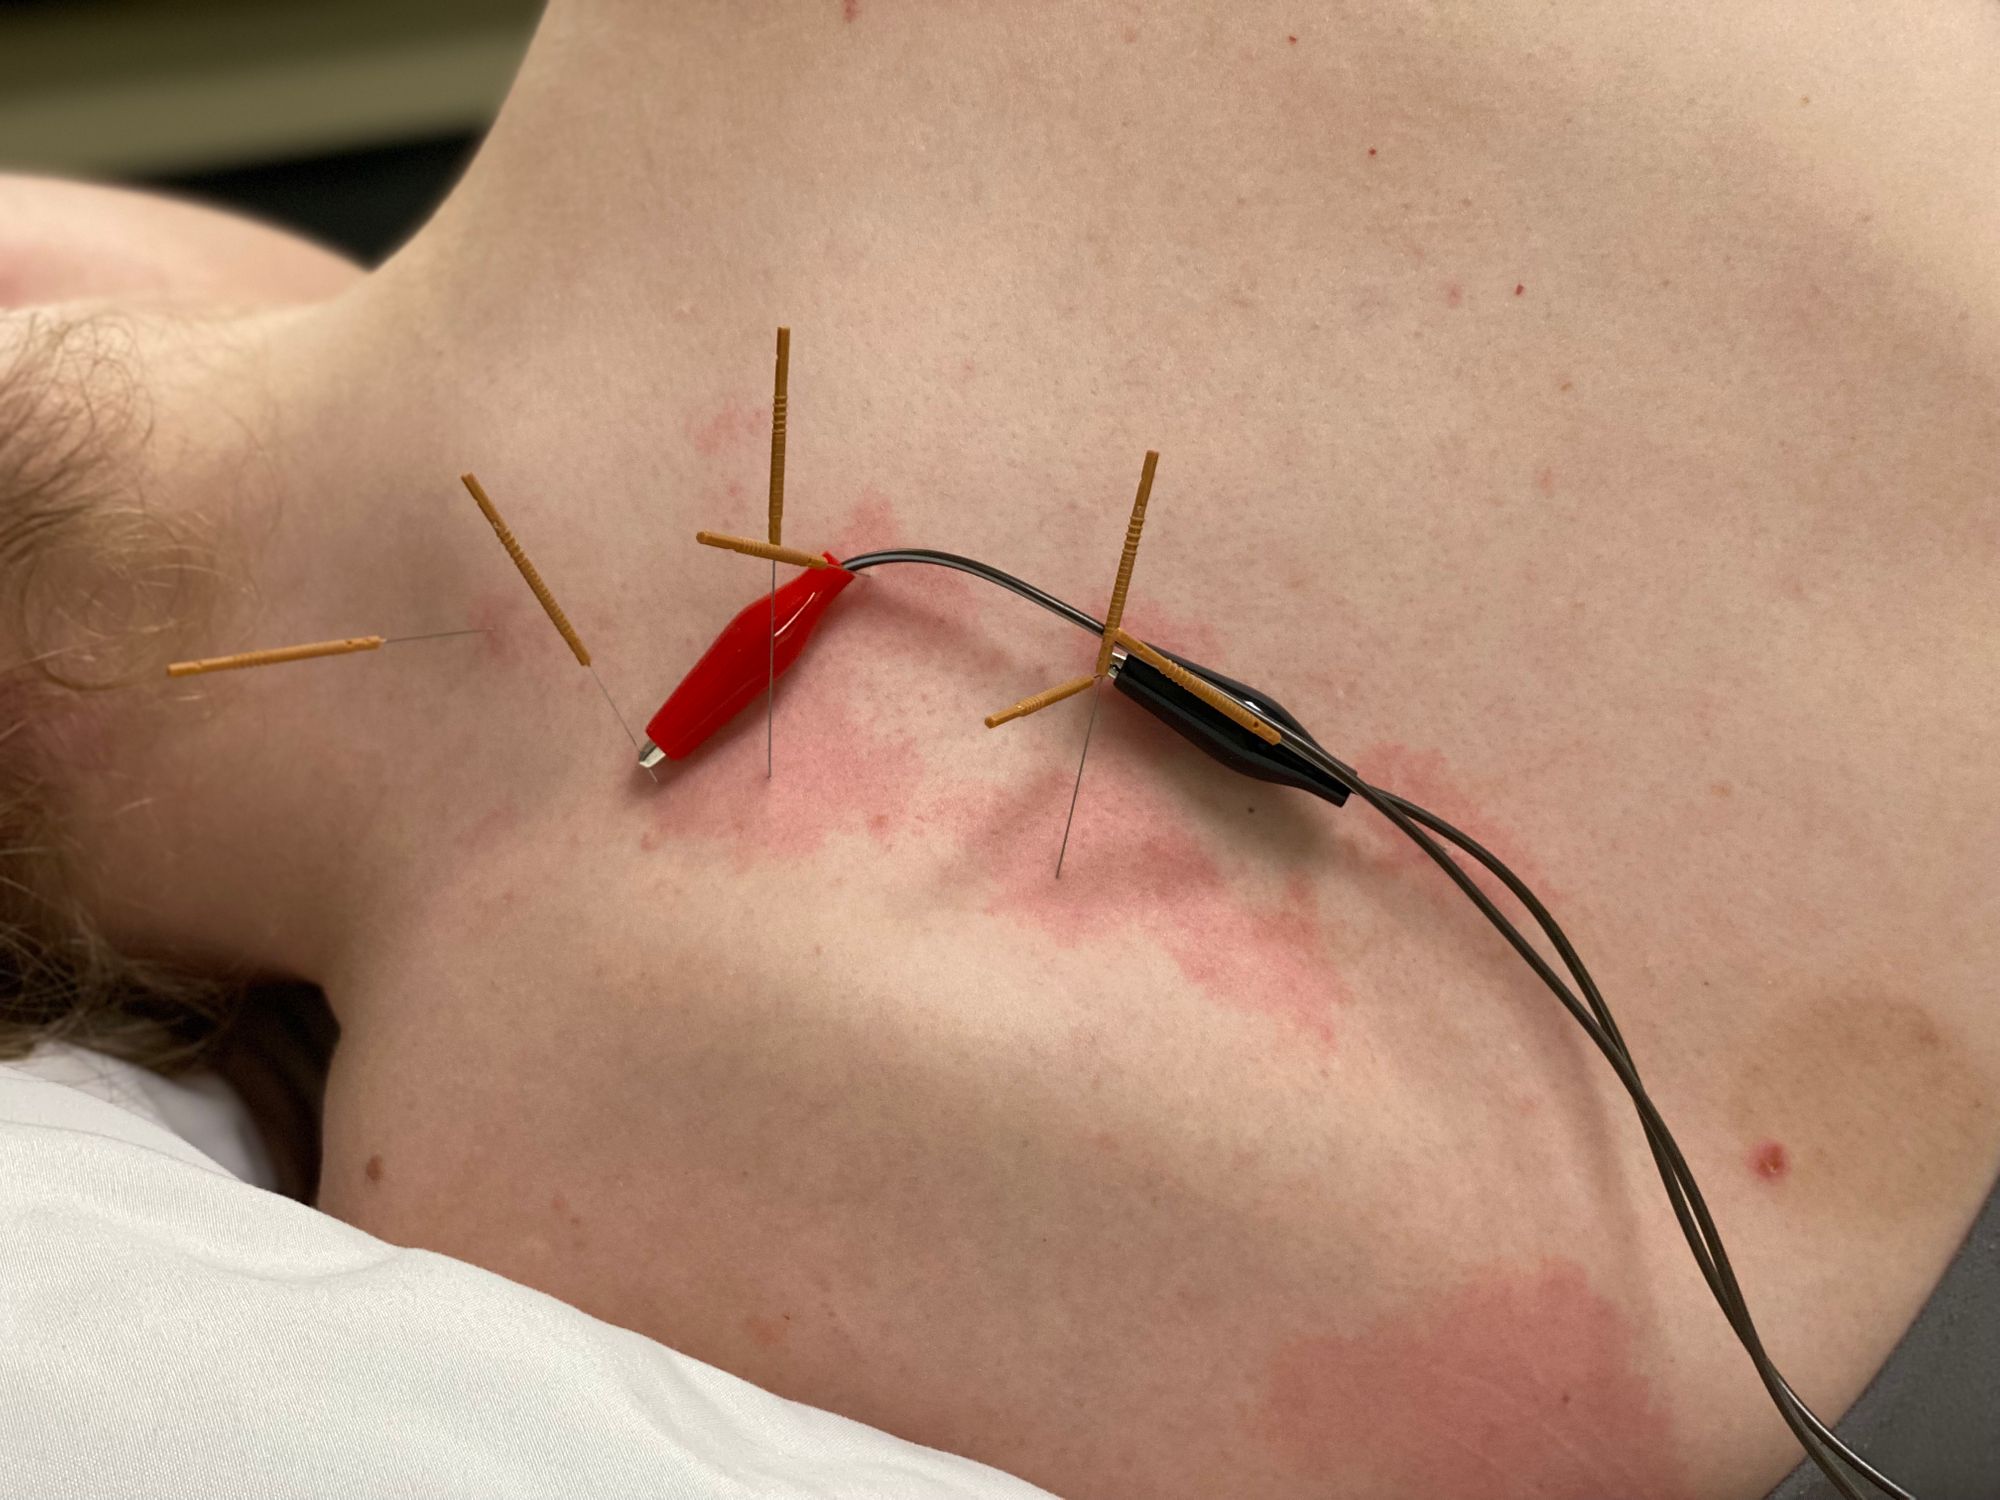 Does dry needling actually work?